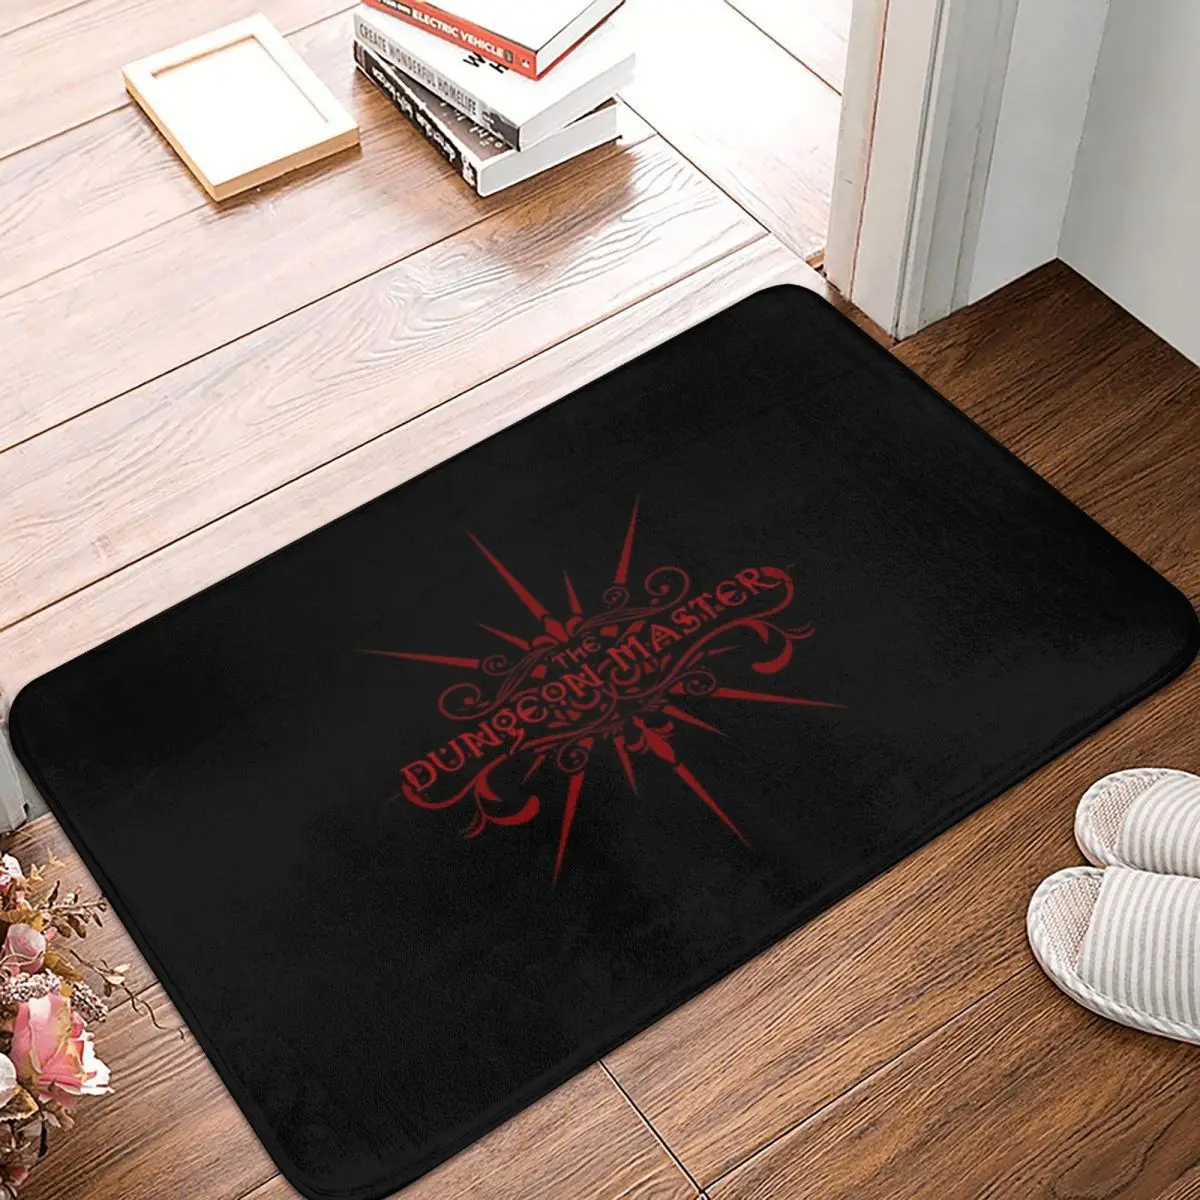 

DND -The Dungeon Master Doormat Polyester Floor Mat Dust-proo Carpet Kitchen Entrance Home Rugs Mats Bedroom Non-slip Footpad